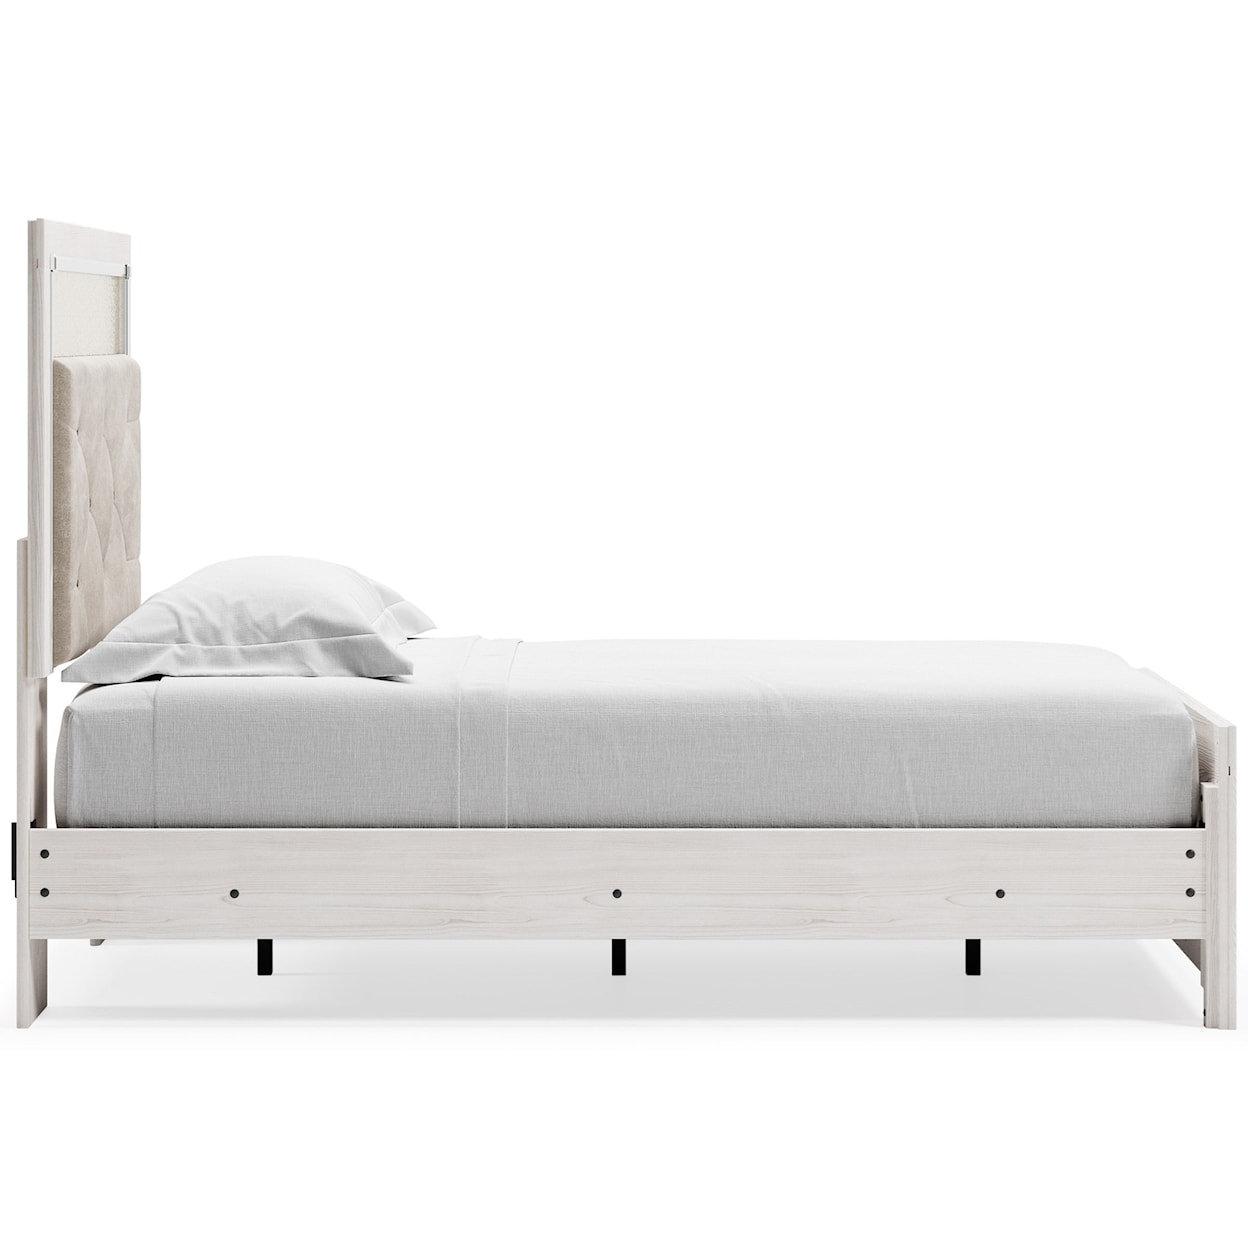 Benchcraft Altyra Twin Upholstered Panel Bed